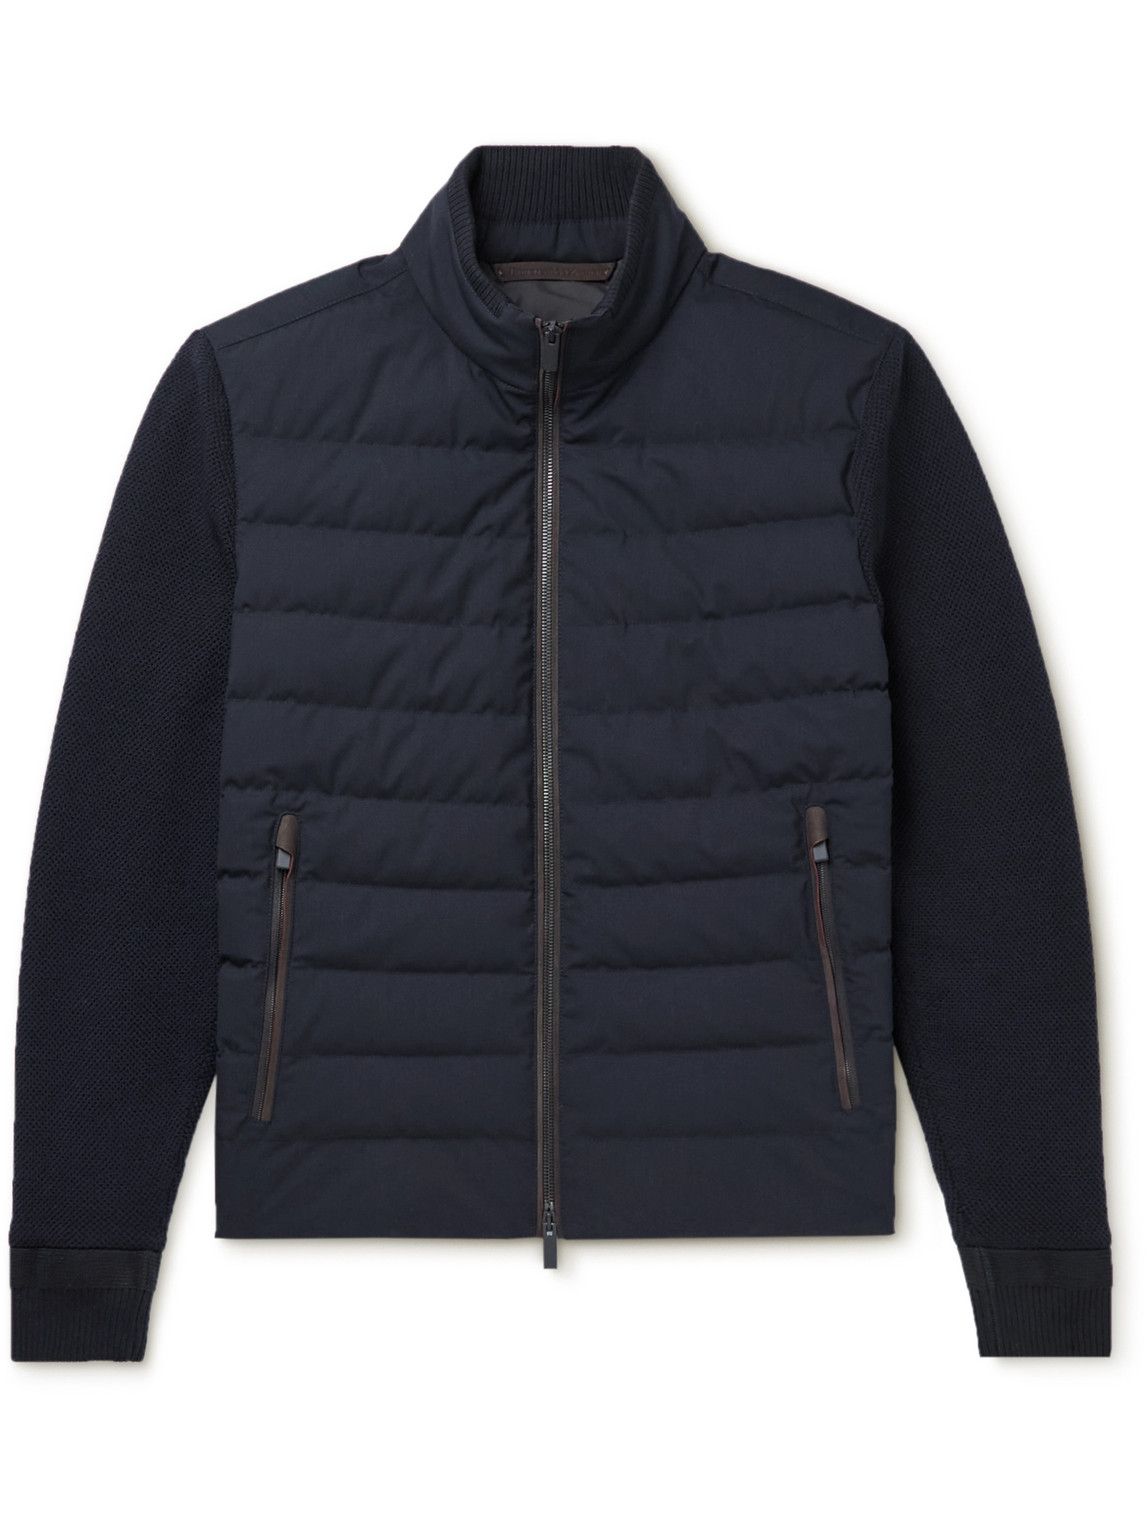 Trofeo Elements Quilted Merino Wool and Cotton-Blend Down Jacket